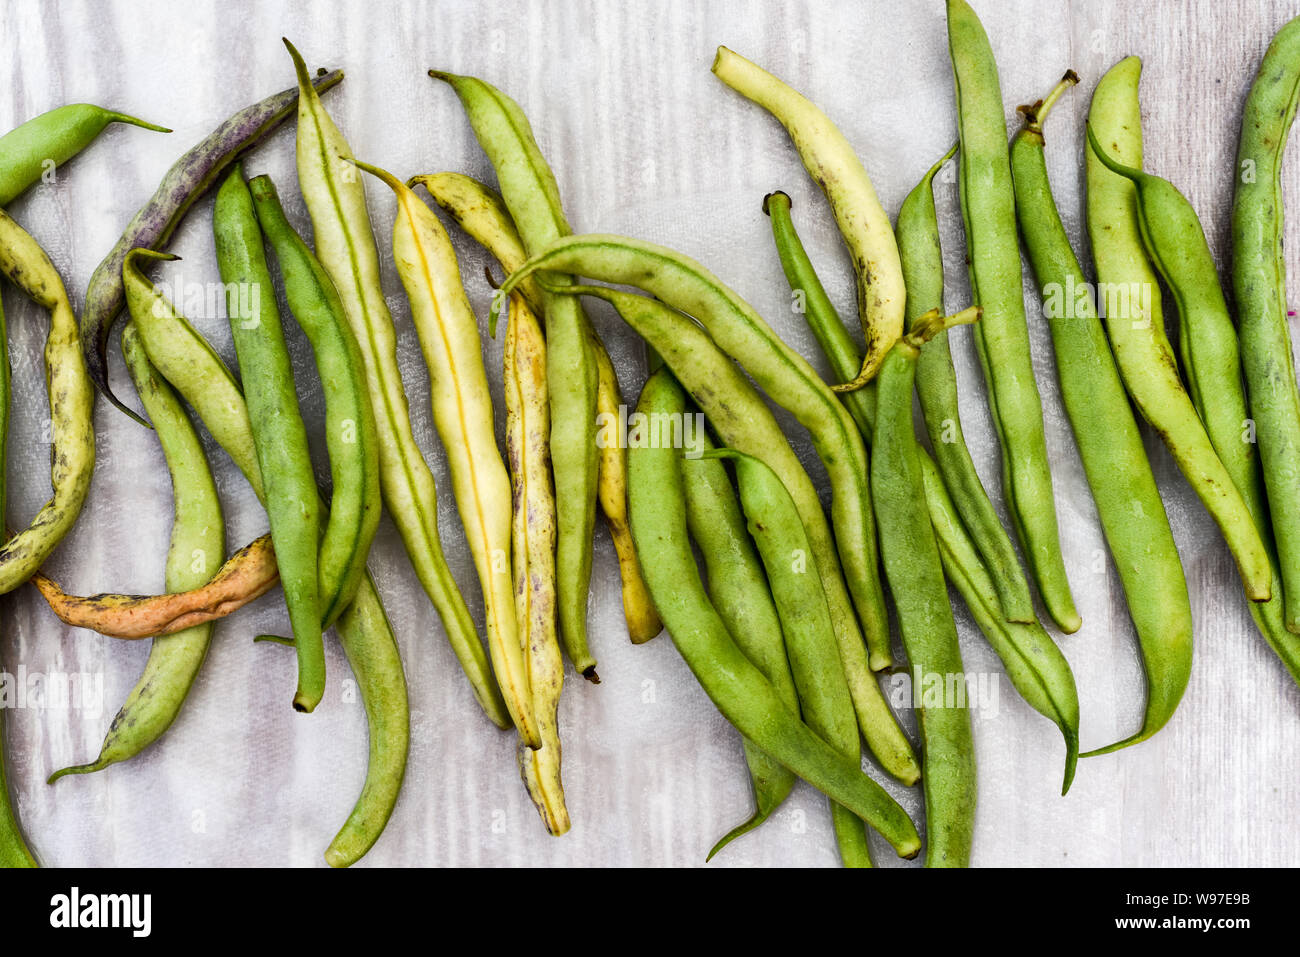 Broad beans, home grown organic broad or runner beans freshly picked Stock Photo